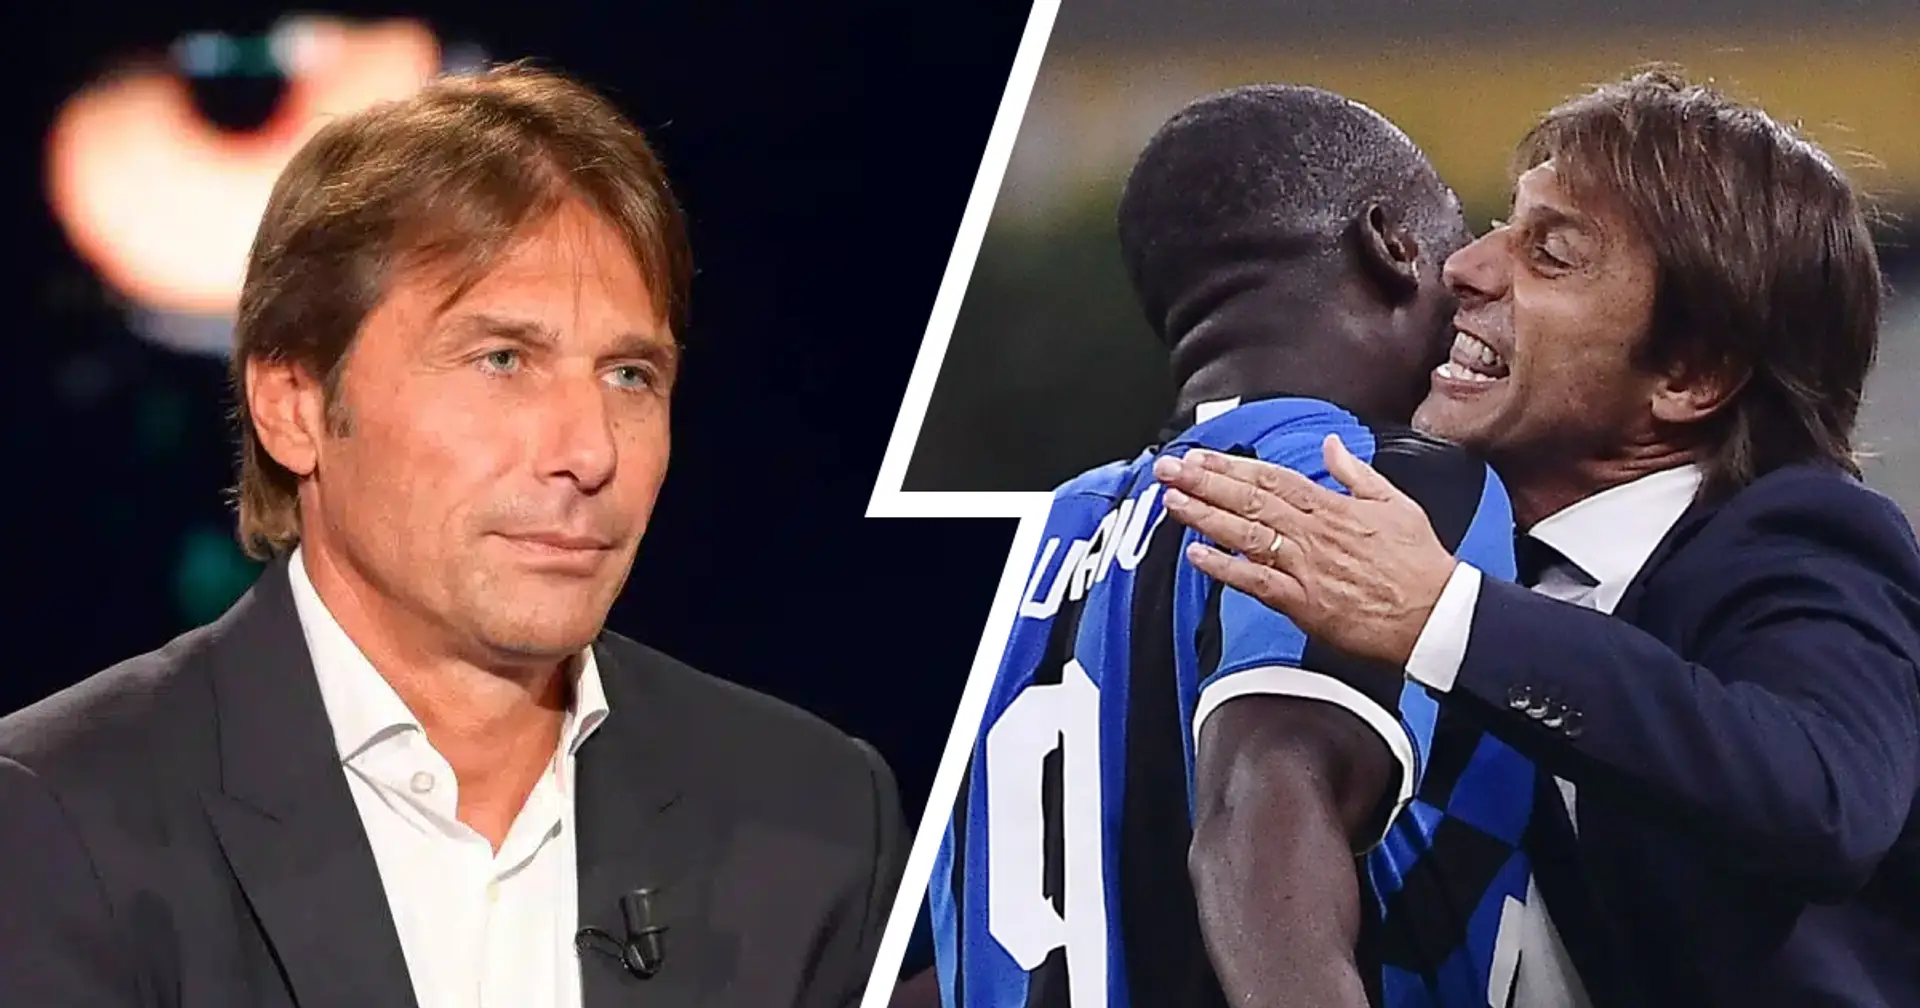 'We could've become dominant': Conte names 2 players he wanted Chelsea to sign after Prem win — one is Lukaku